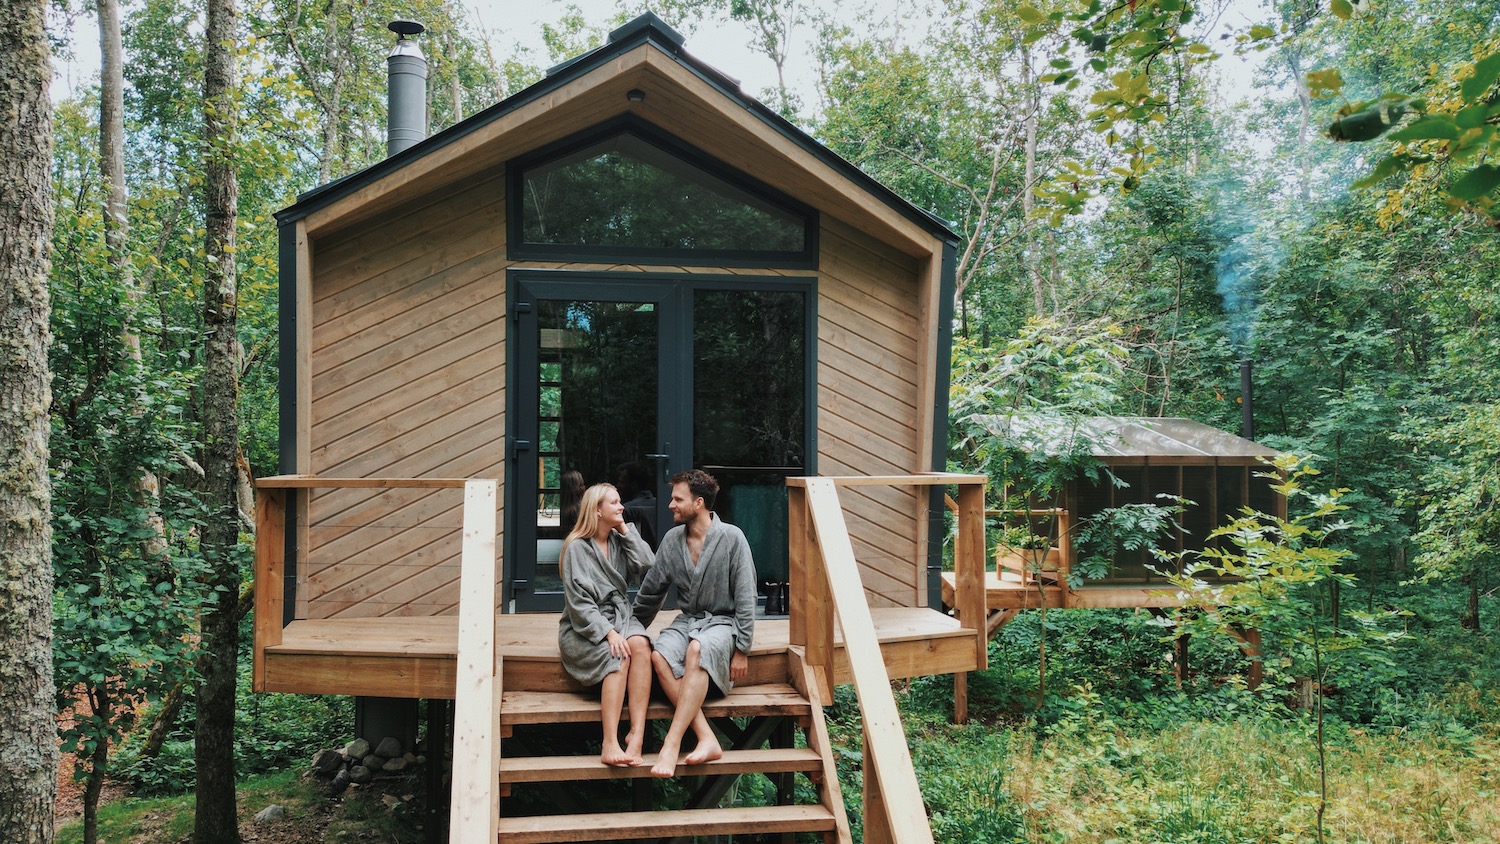 Our new favourite - Hekso Treehouse in Matsalu